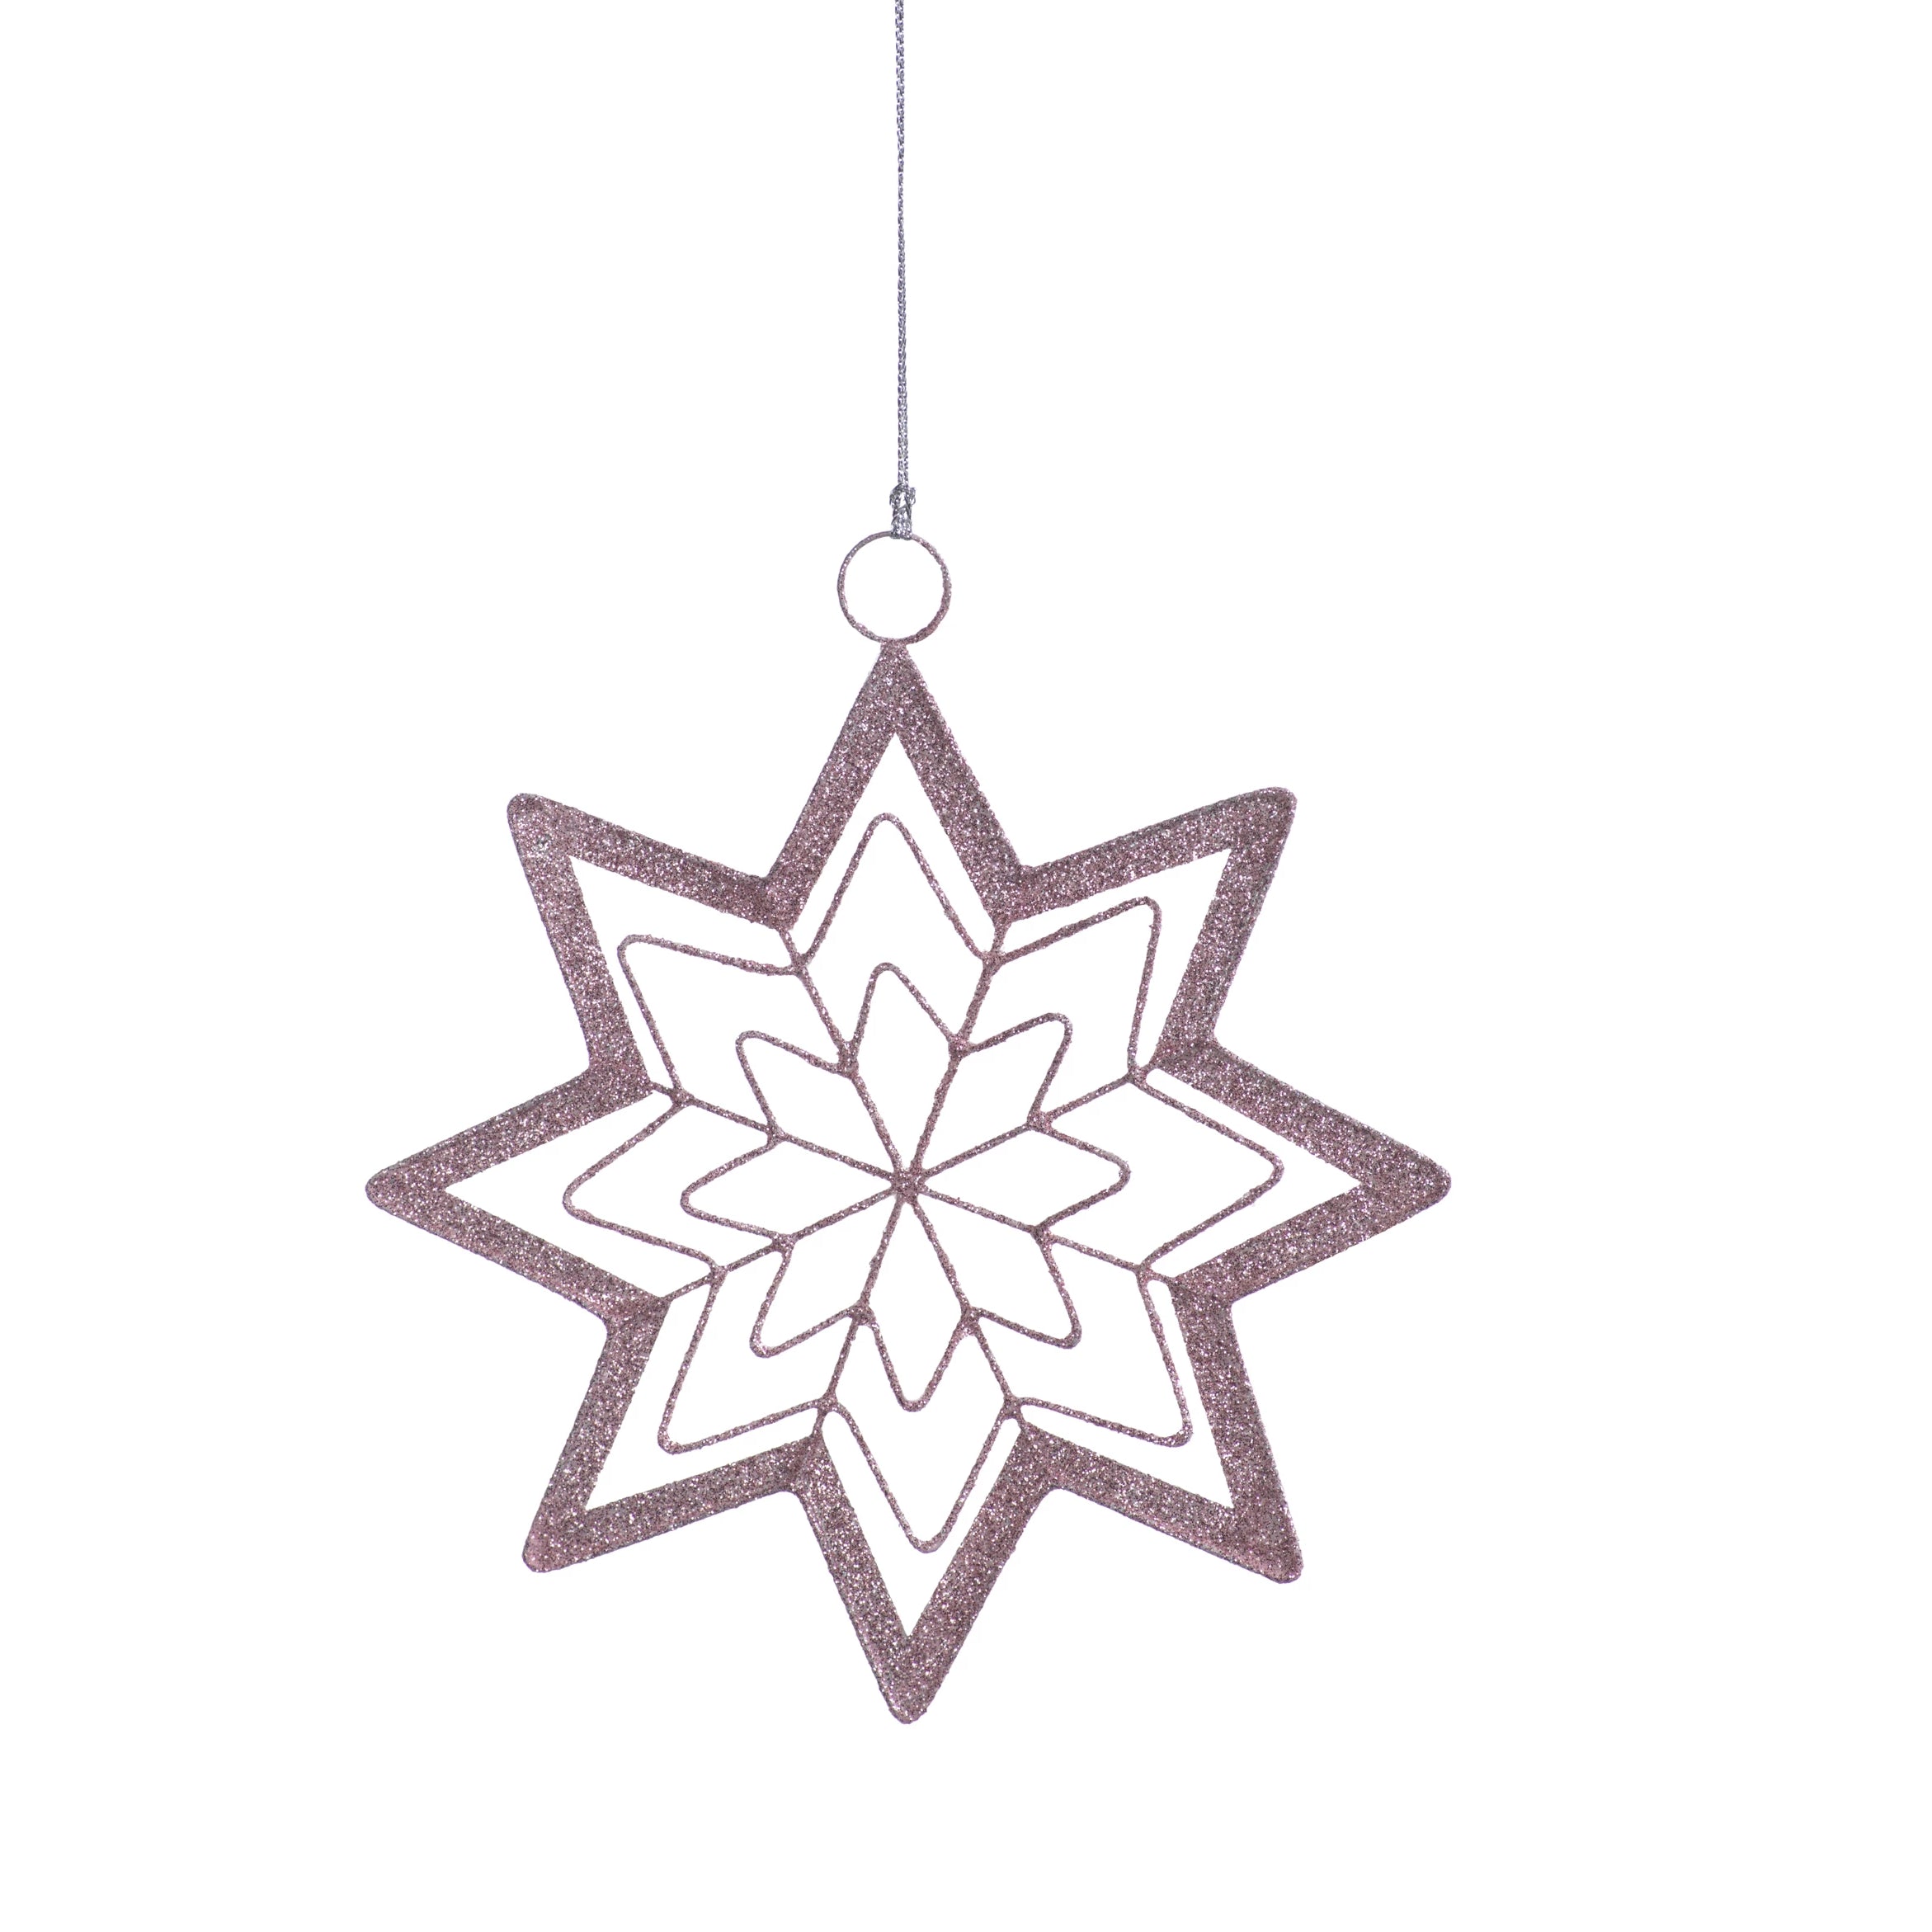 8-Point Star Ornament - 5 Colors - CARLYLE AVENUE